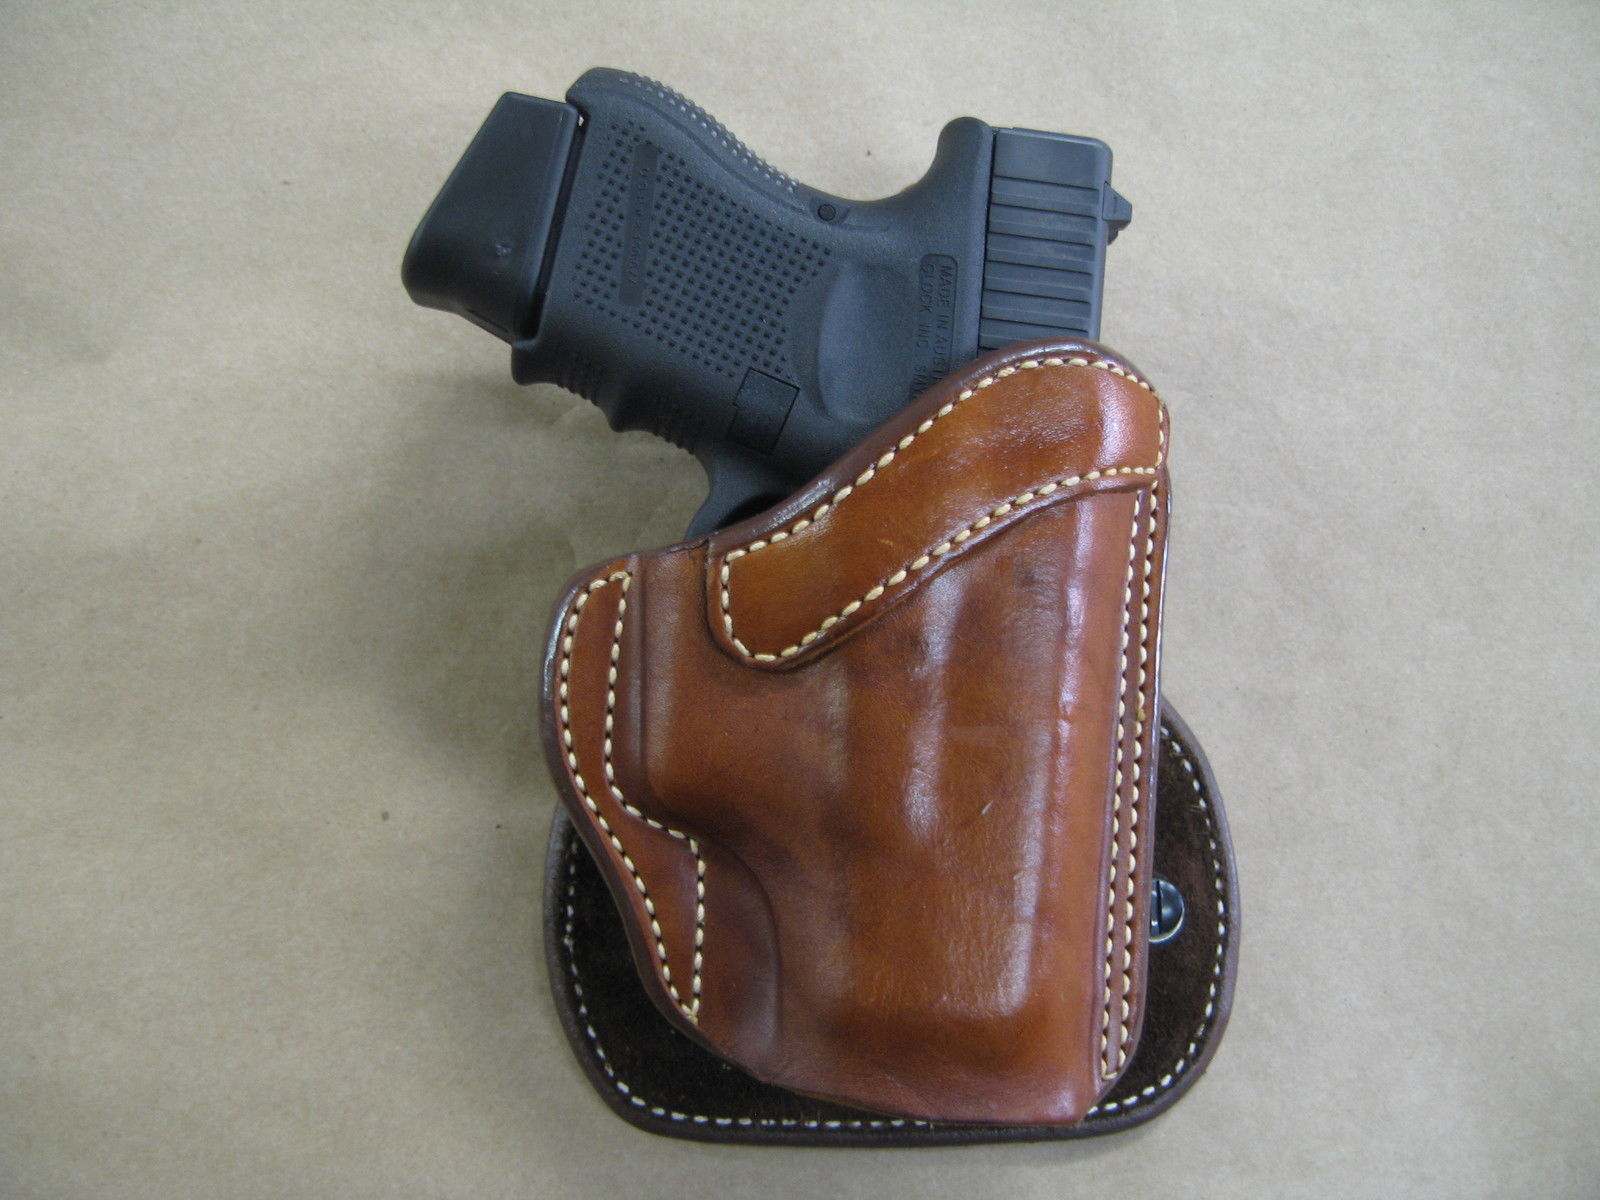 OWB PADDLE ADJUSTABLE CANT. PADDLE LEATHER HOLSTER FOR SIG SAUER P290 